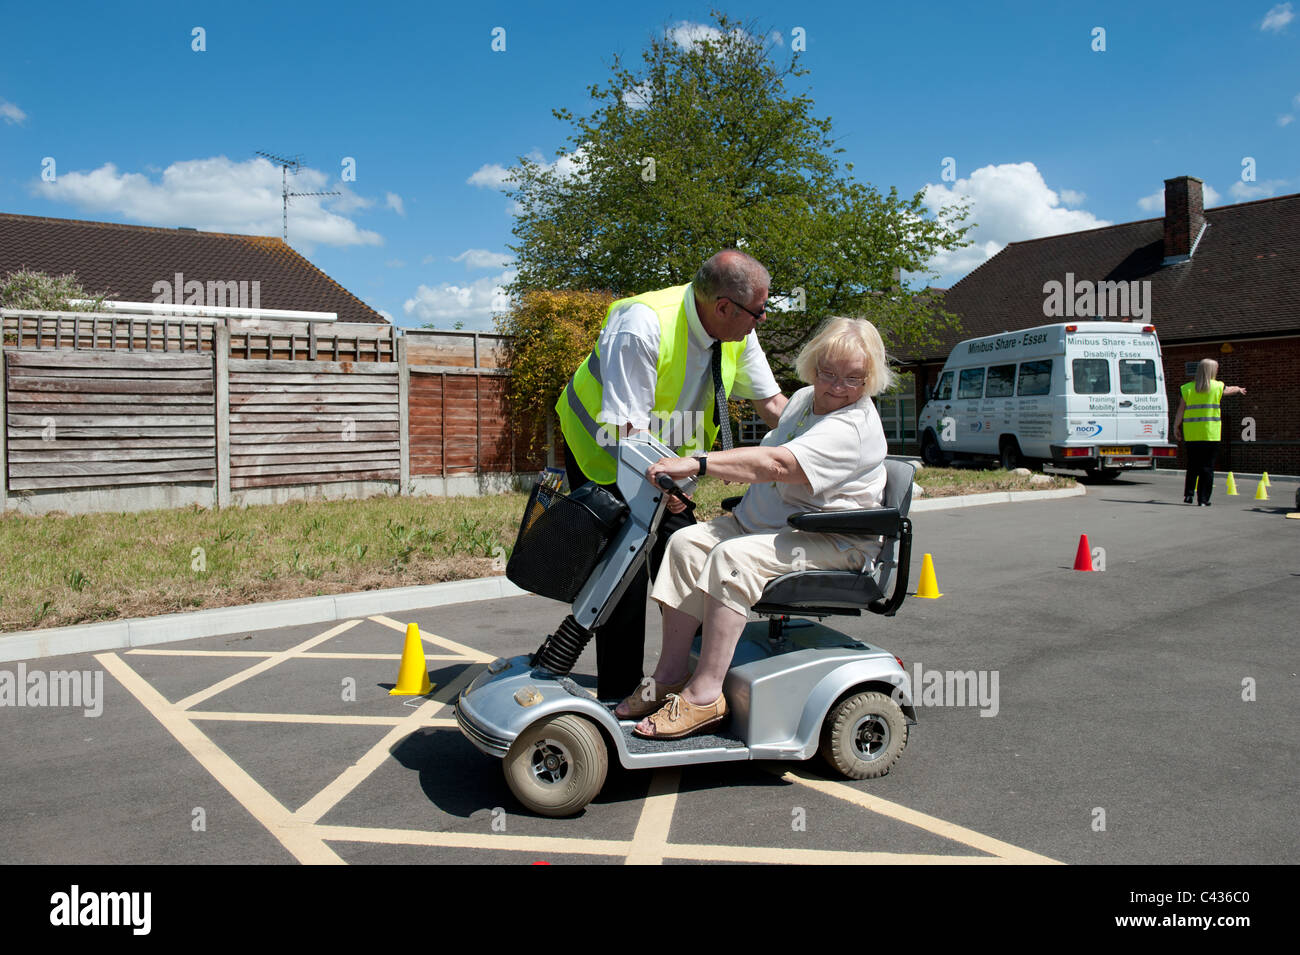 An elderly (senior) lady learning to ride a mobility scooter at the Centre for Disability Studies in Rochford, Essex. Stock Photo